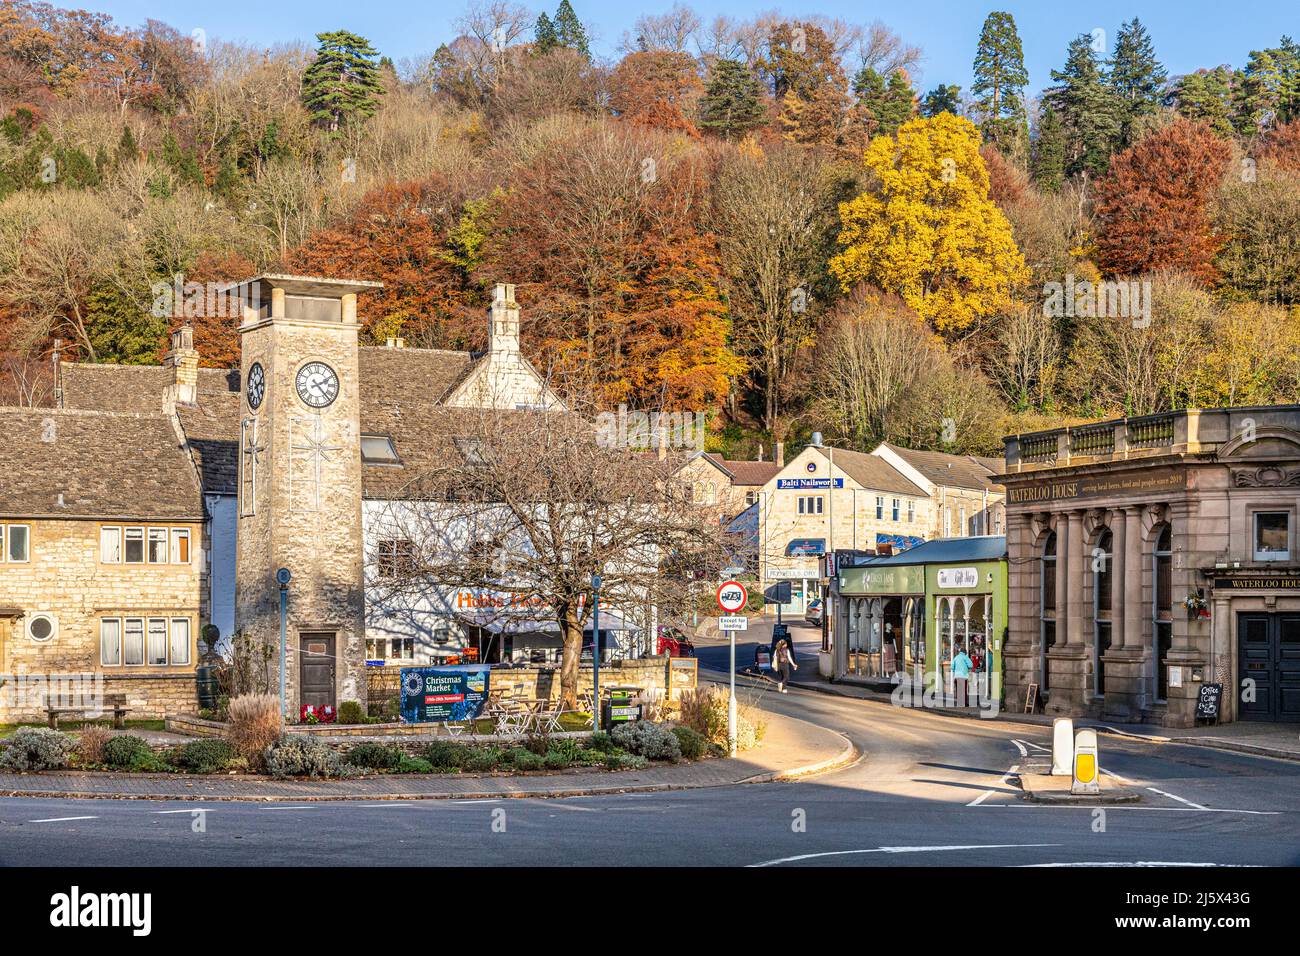 Autumn in the Cotswolds - The small town of Nailsworth in the Stroud Valleys, Gloucestershire, England UK Stock Photo